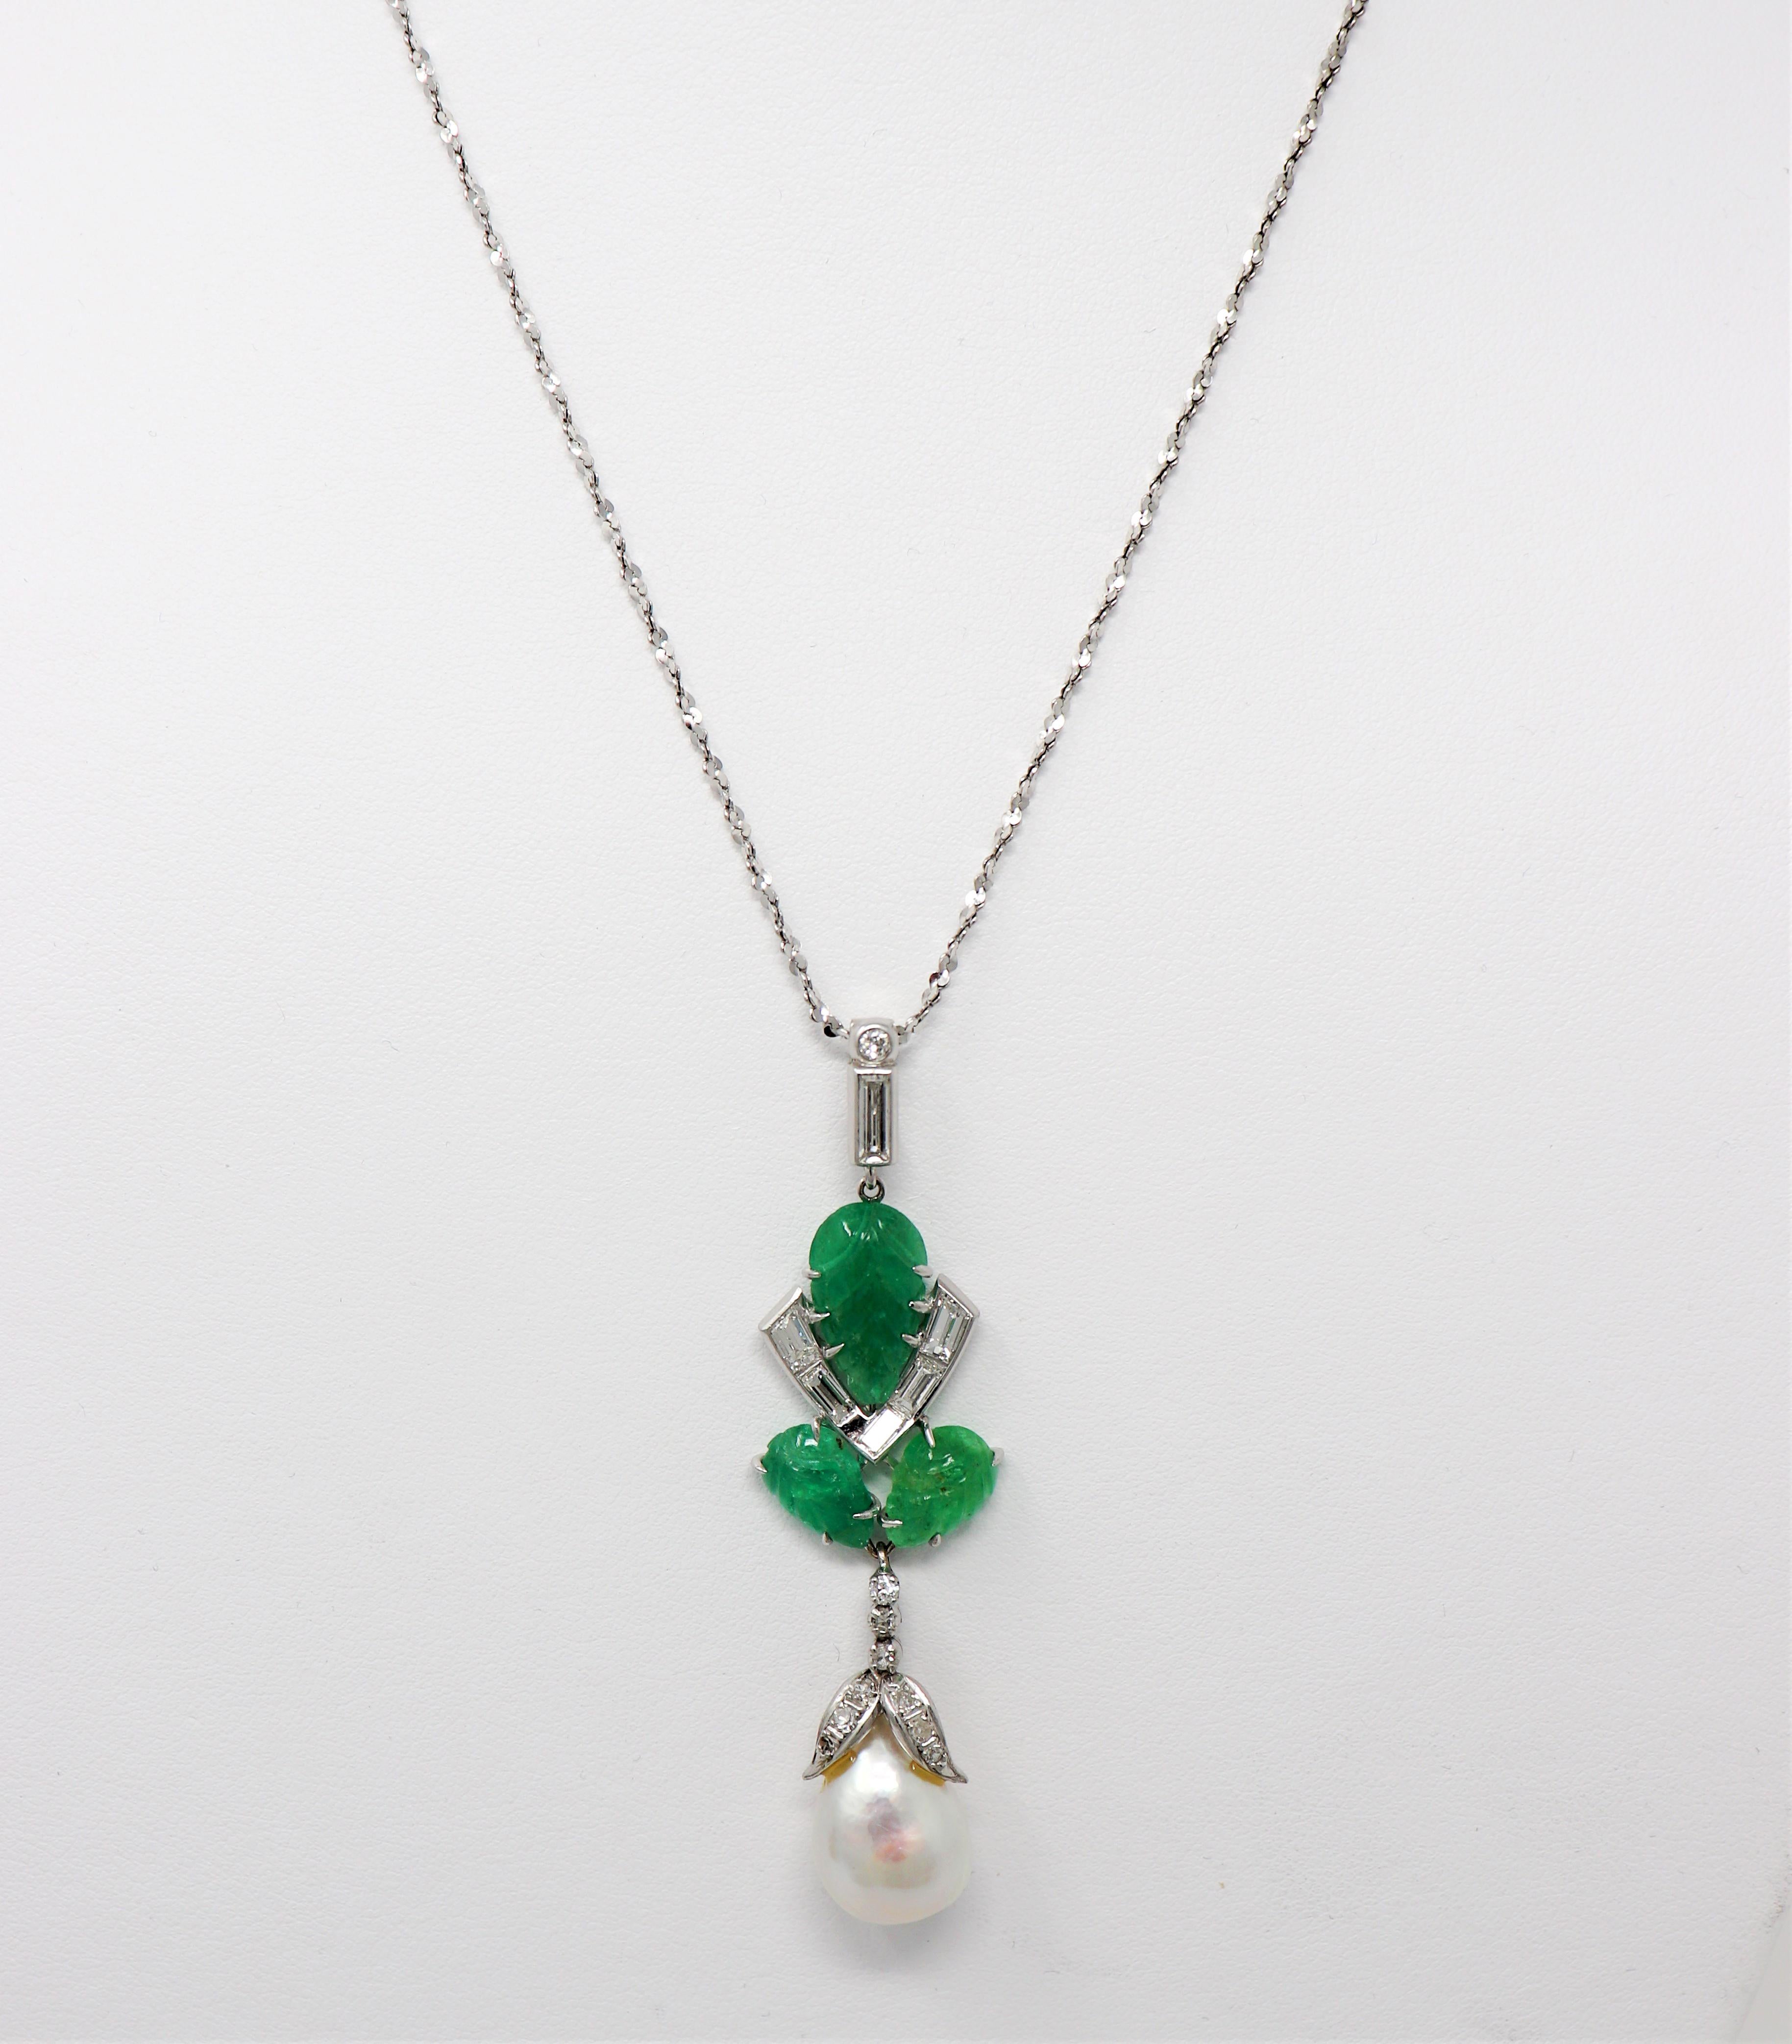 Elegant pendant necklace featuring natural diamonds, emeralds and a single large cultured baroque pearl. The elongated pendant dangles luxuriously on the neck while the accent diamonds catch the light and shimmer beautifully against the bright green